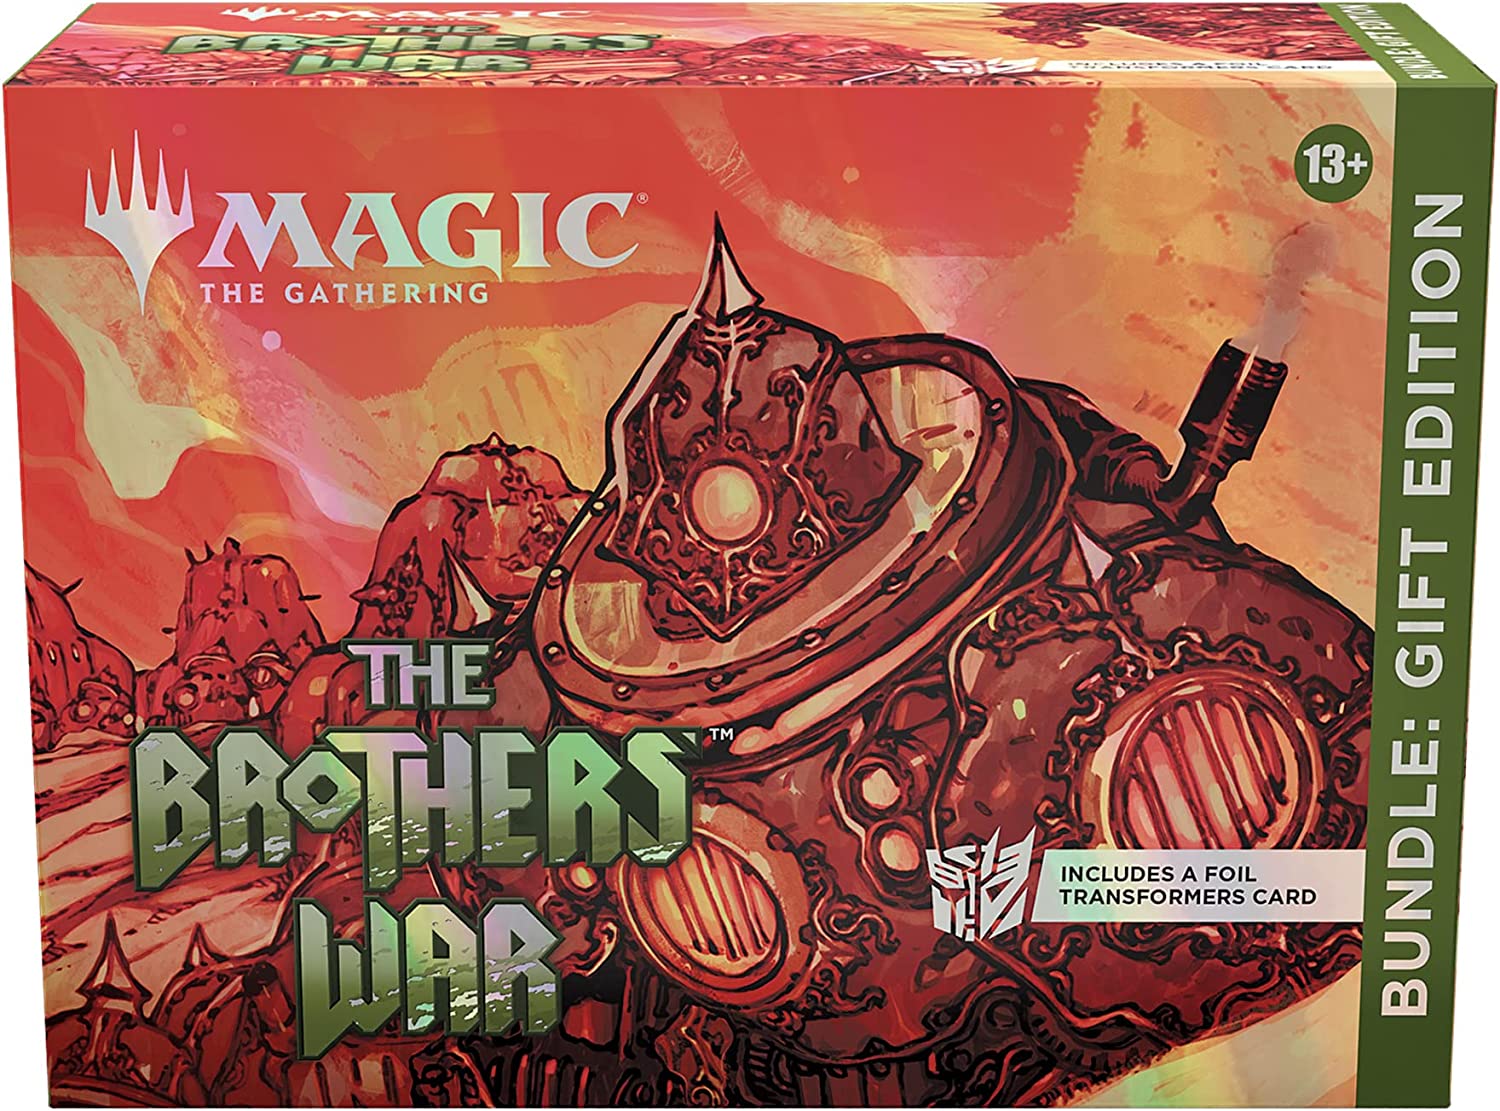 (BSG Certified USED) Magic: the Gathering - The Brothers' War - Gift Bundle